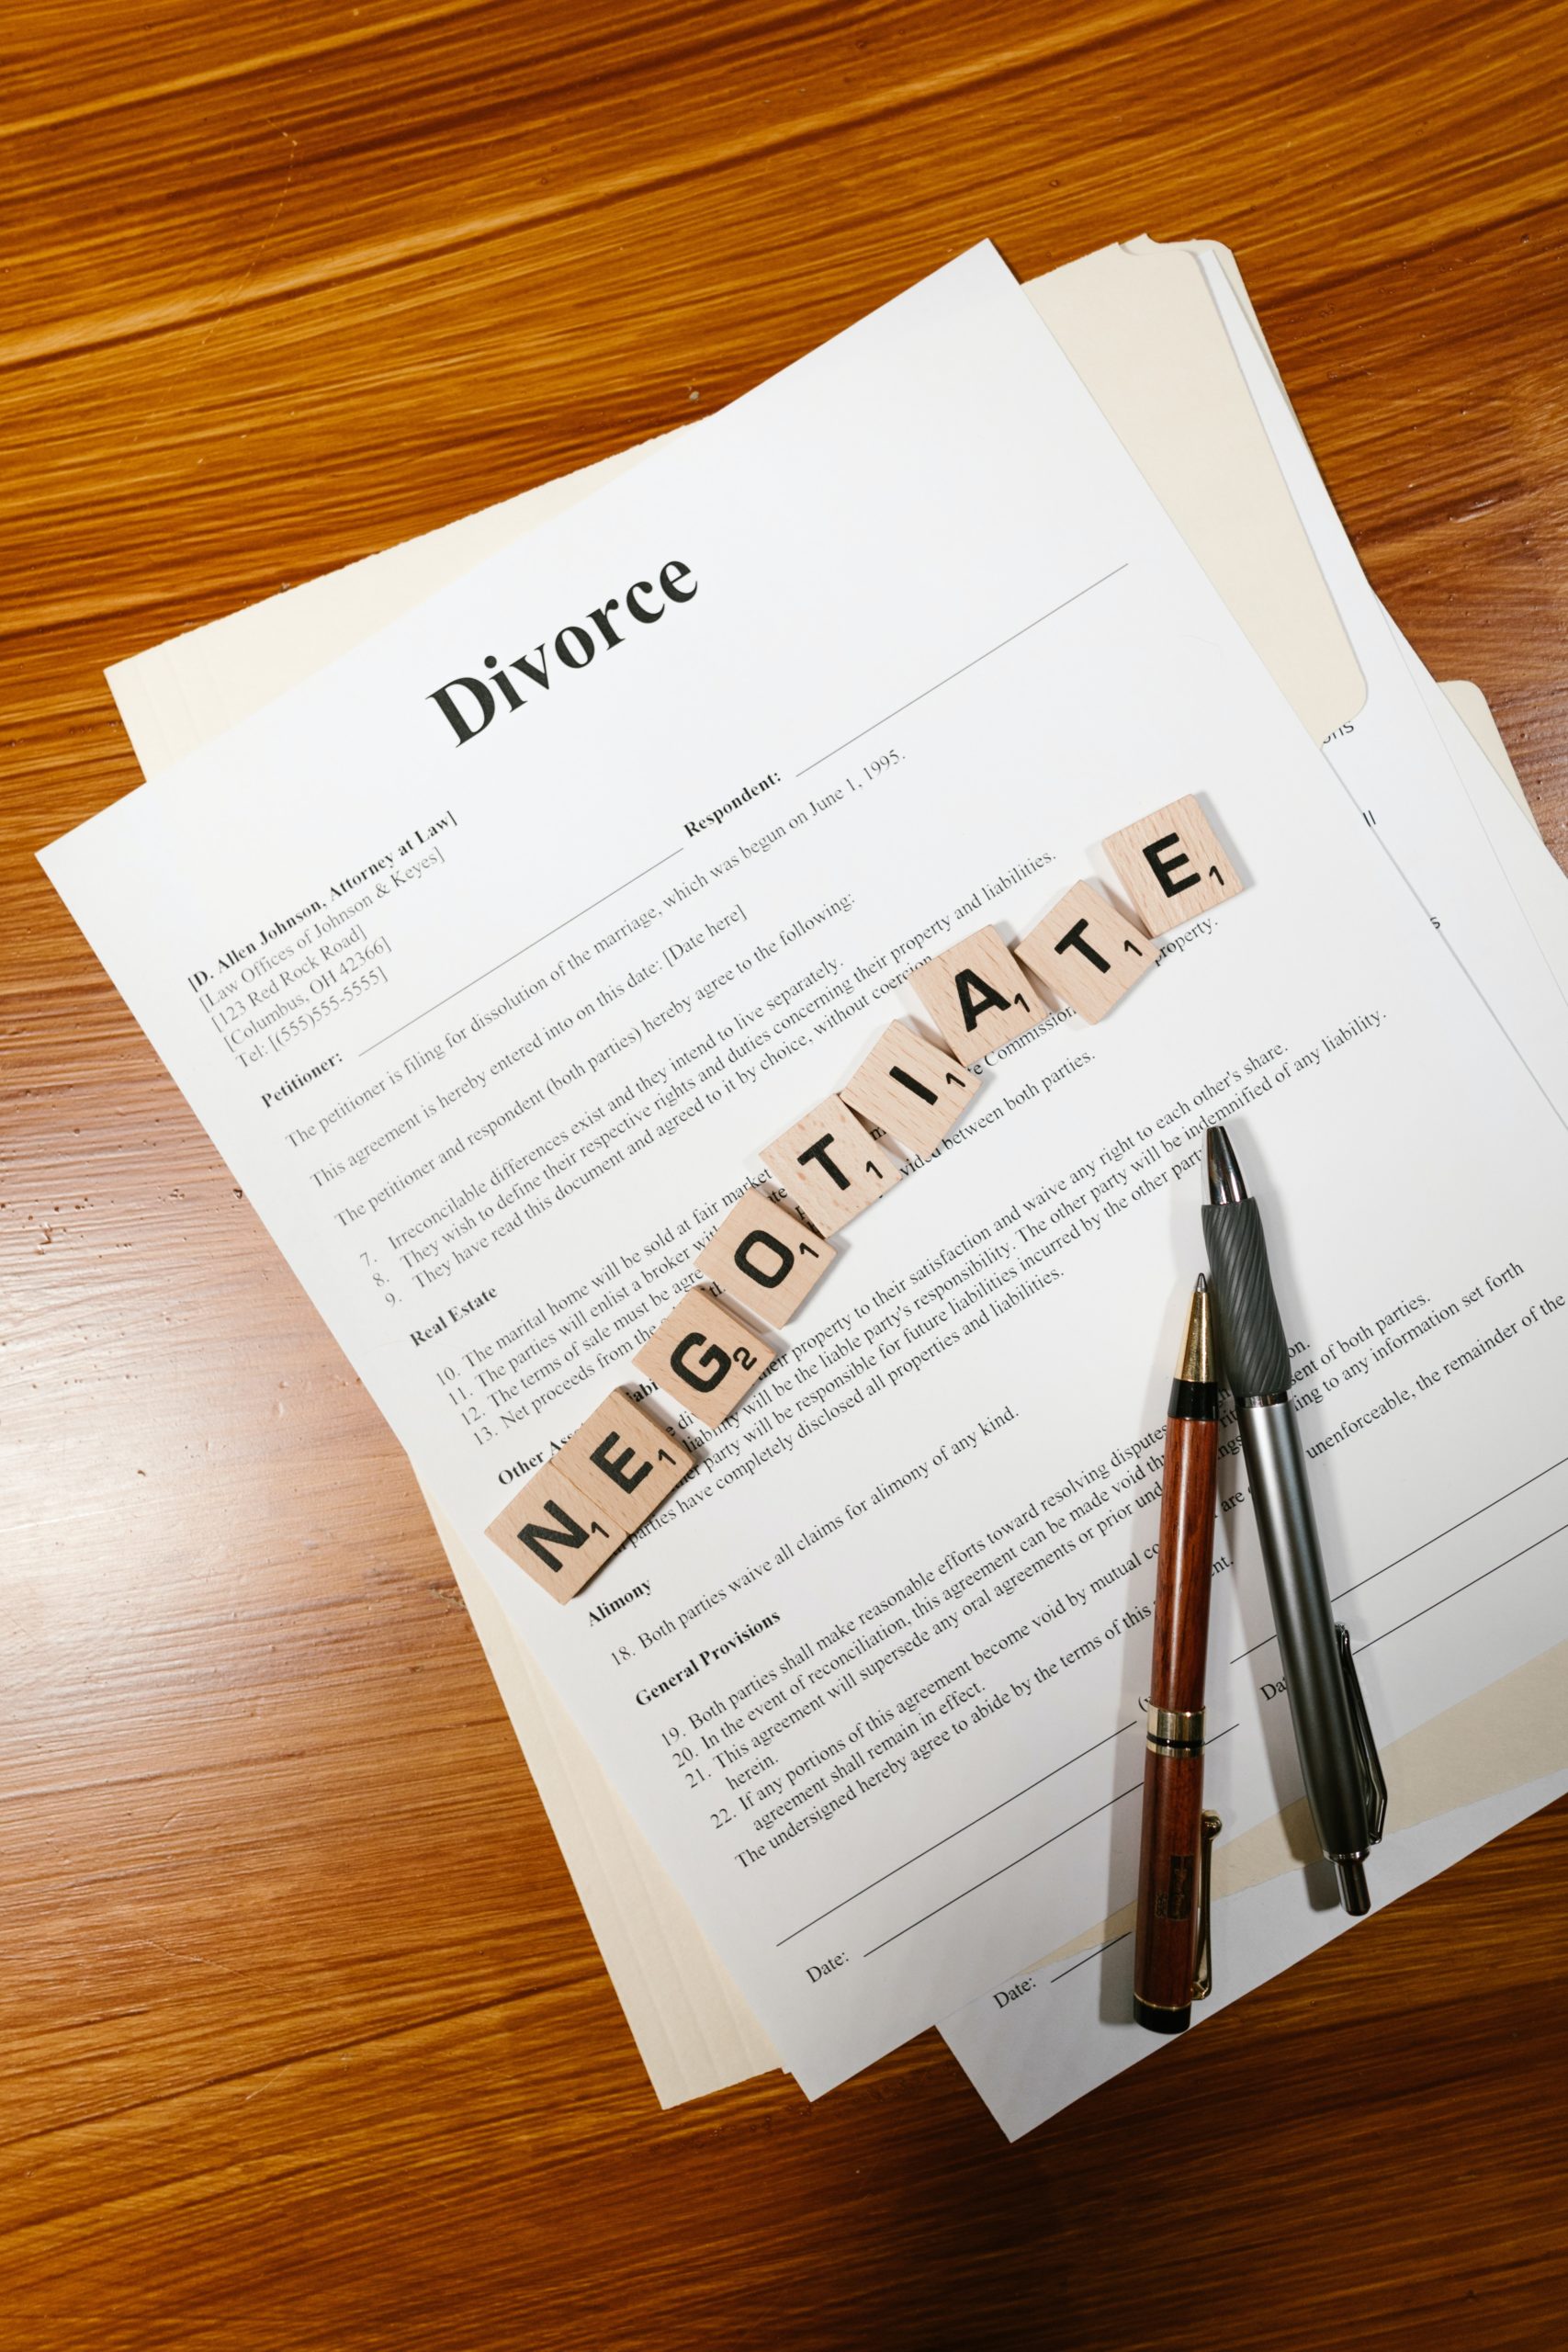 How Divorce Can Impact Your Credit Score